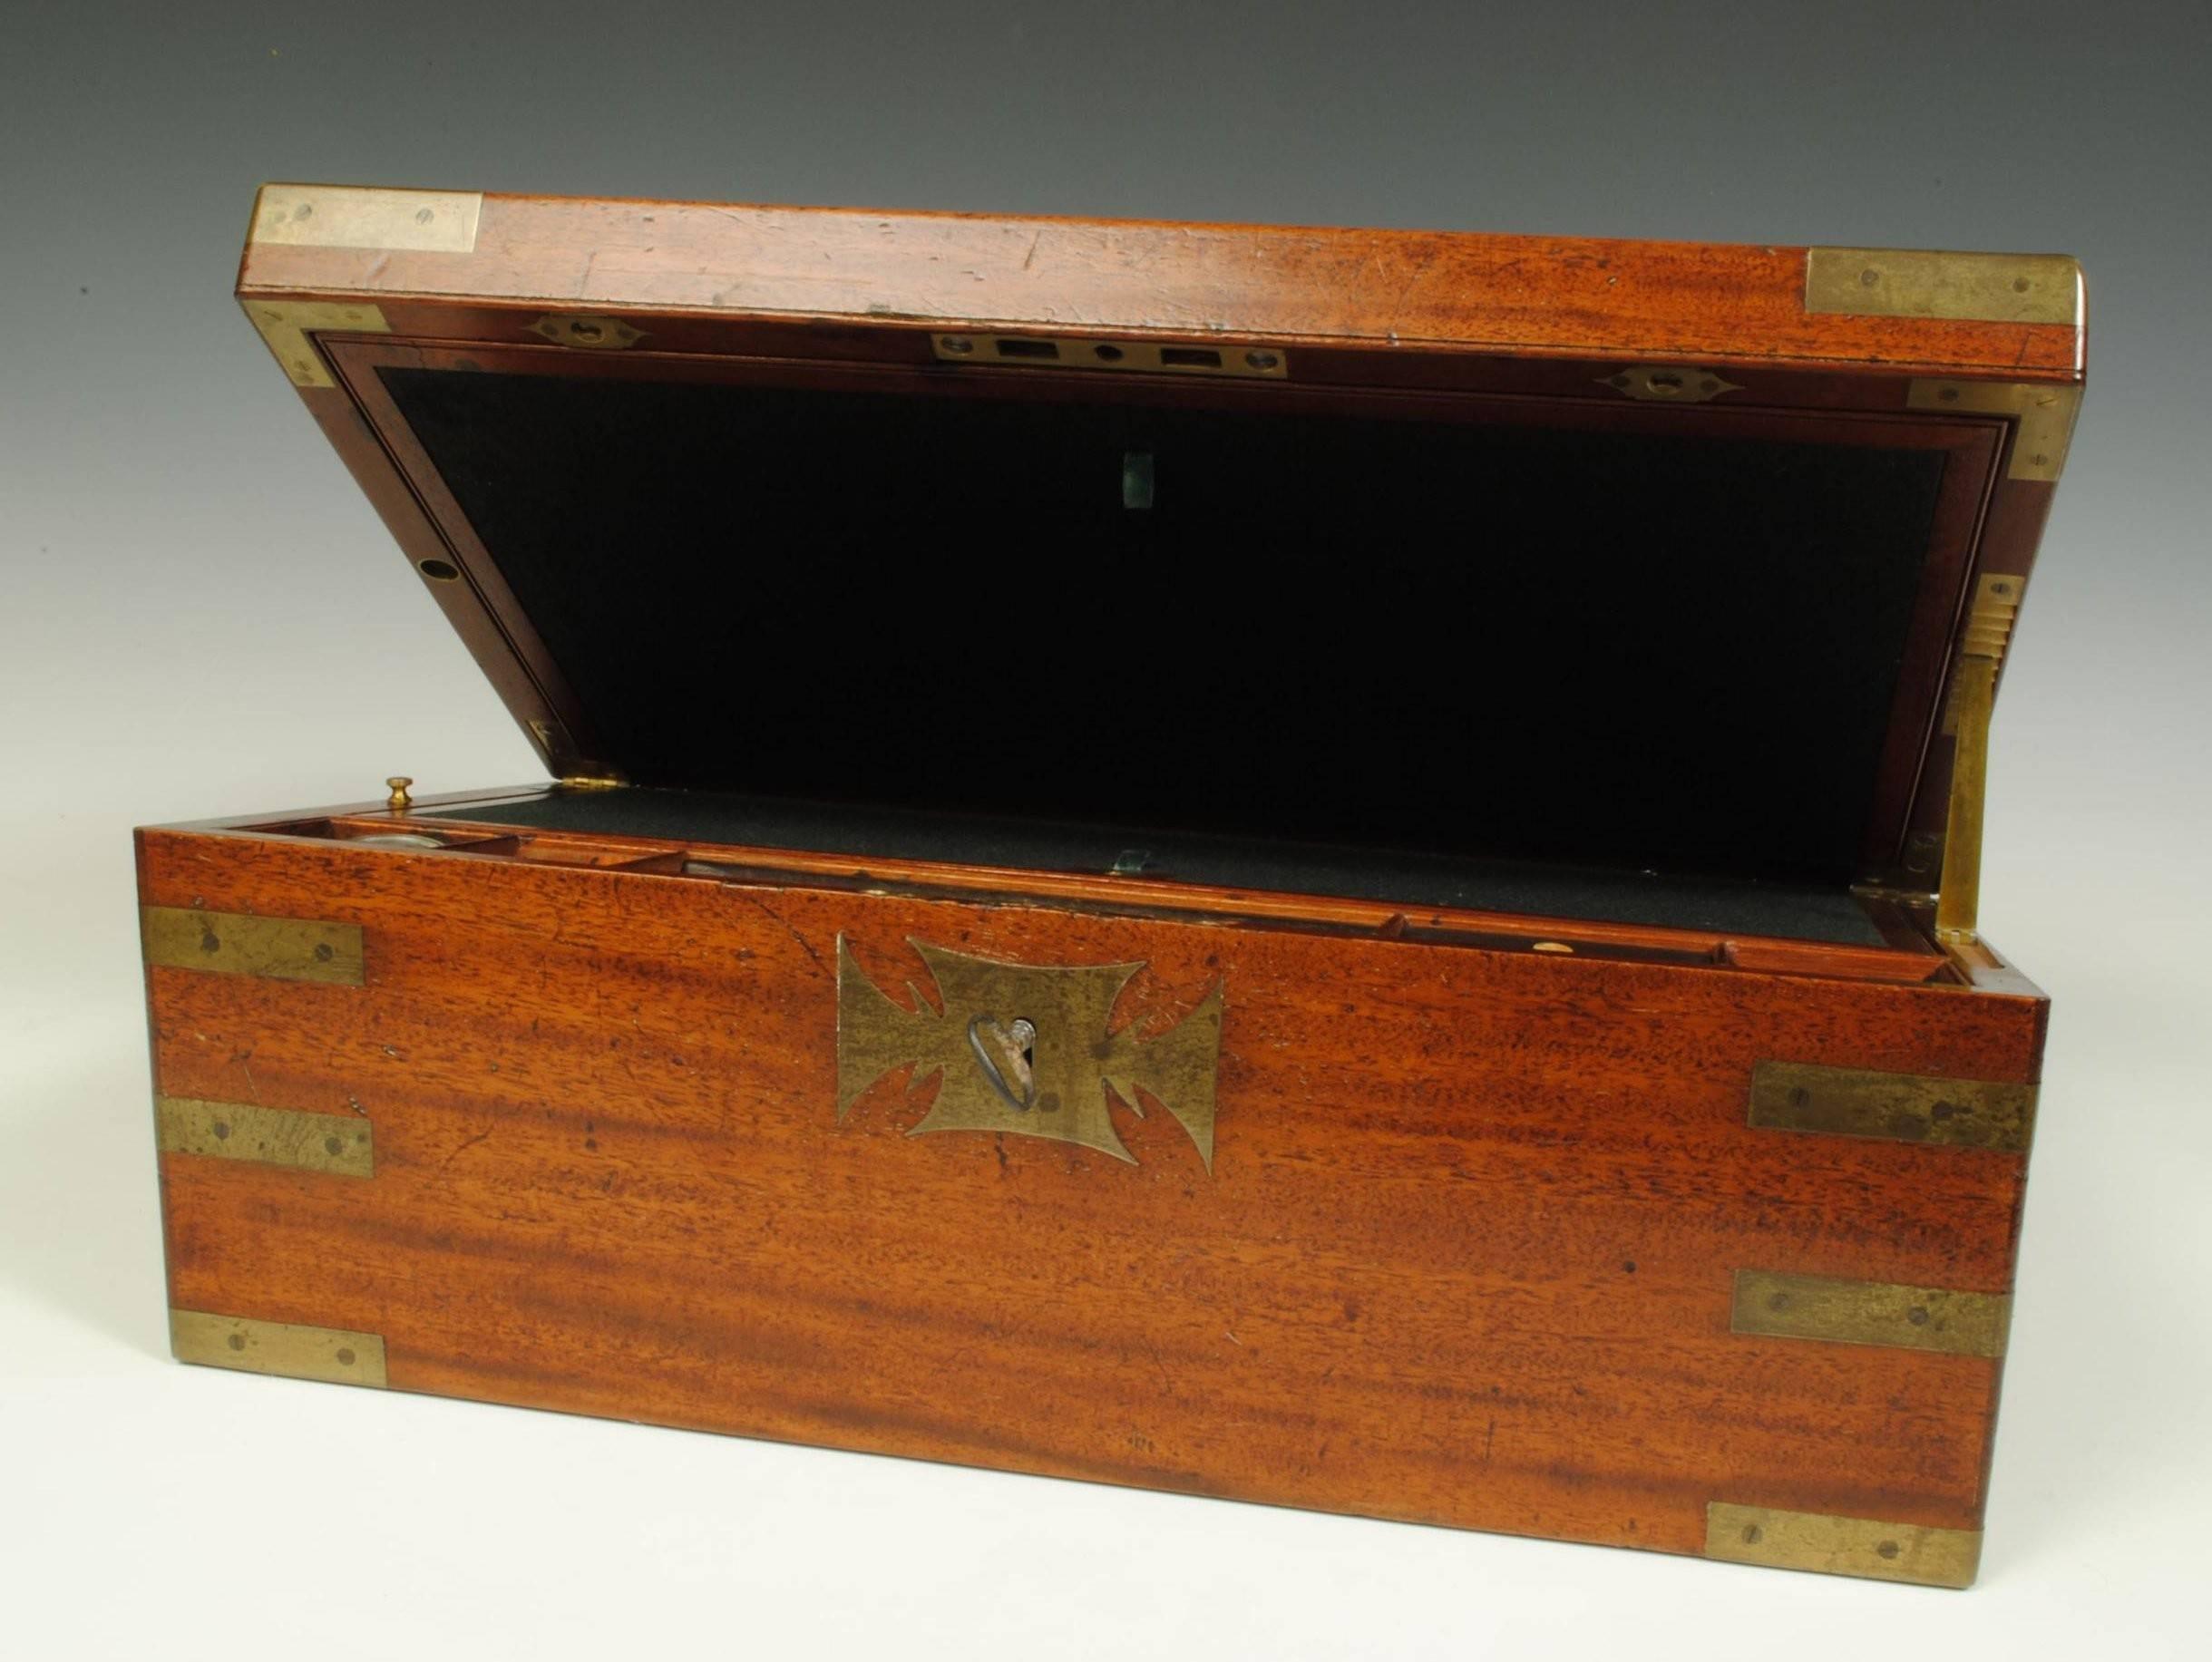 A superb quality 19th century mahogany and brass bound writing box with fine brass mounts, opening to reveal a slope with inkwells and hidden drawers.